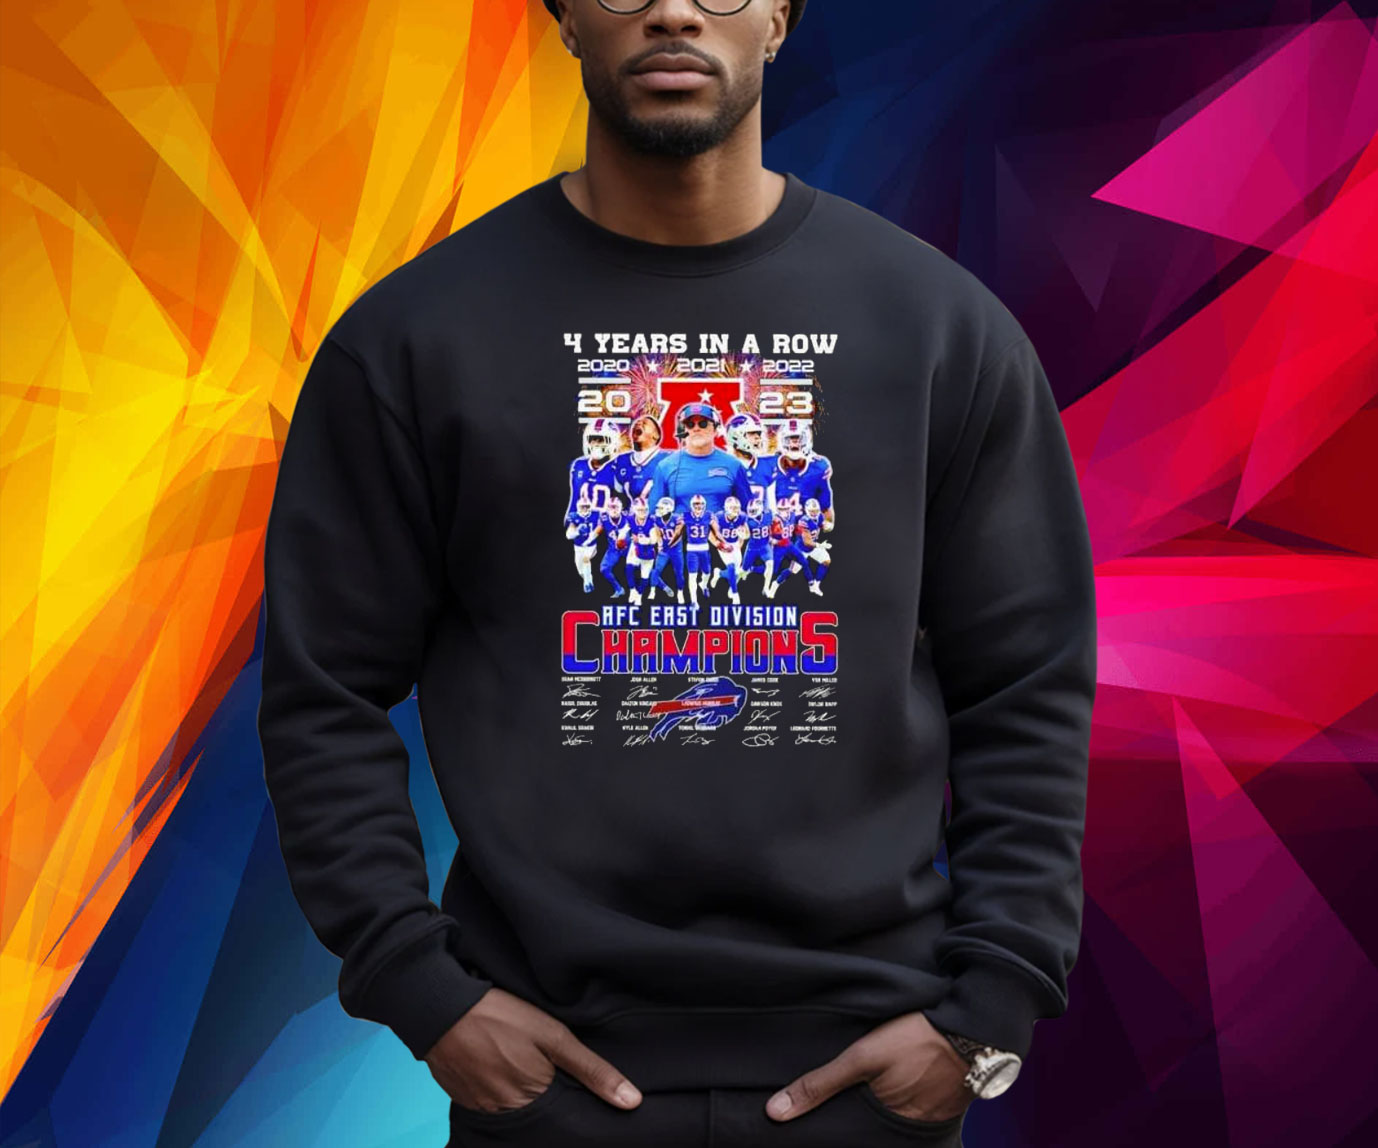 Bills 4 Years In A Row 2023 AFC East Division Champions Signatures Shirt